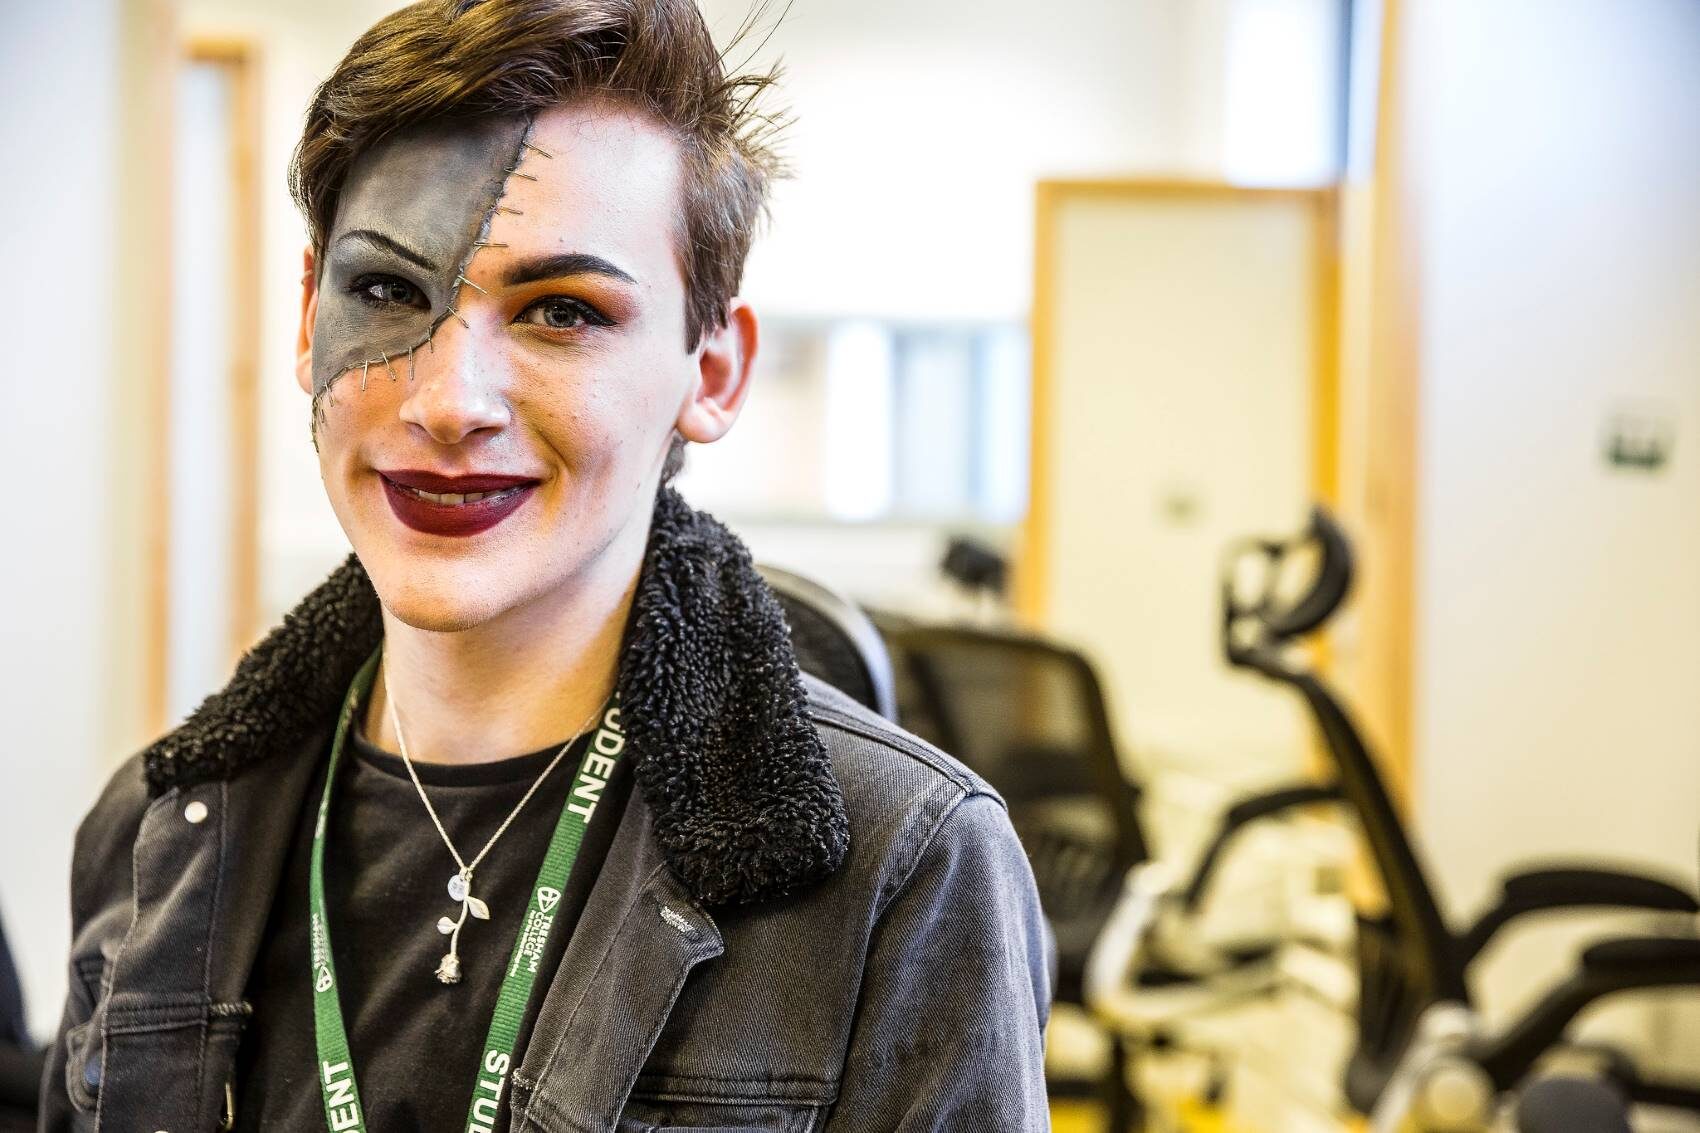 Theatrical and Media Make-Up Advanced (Level 3)